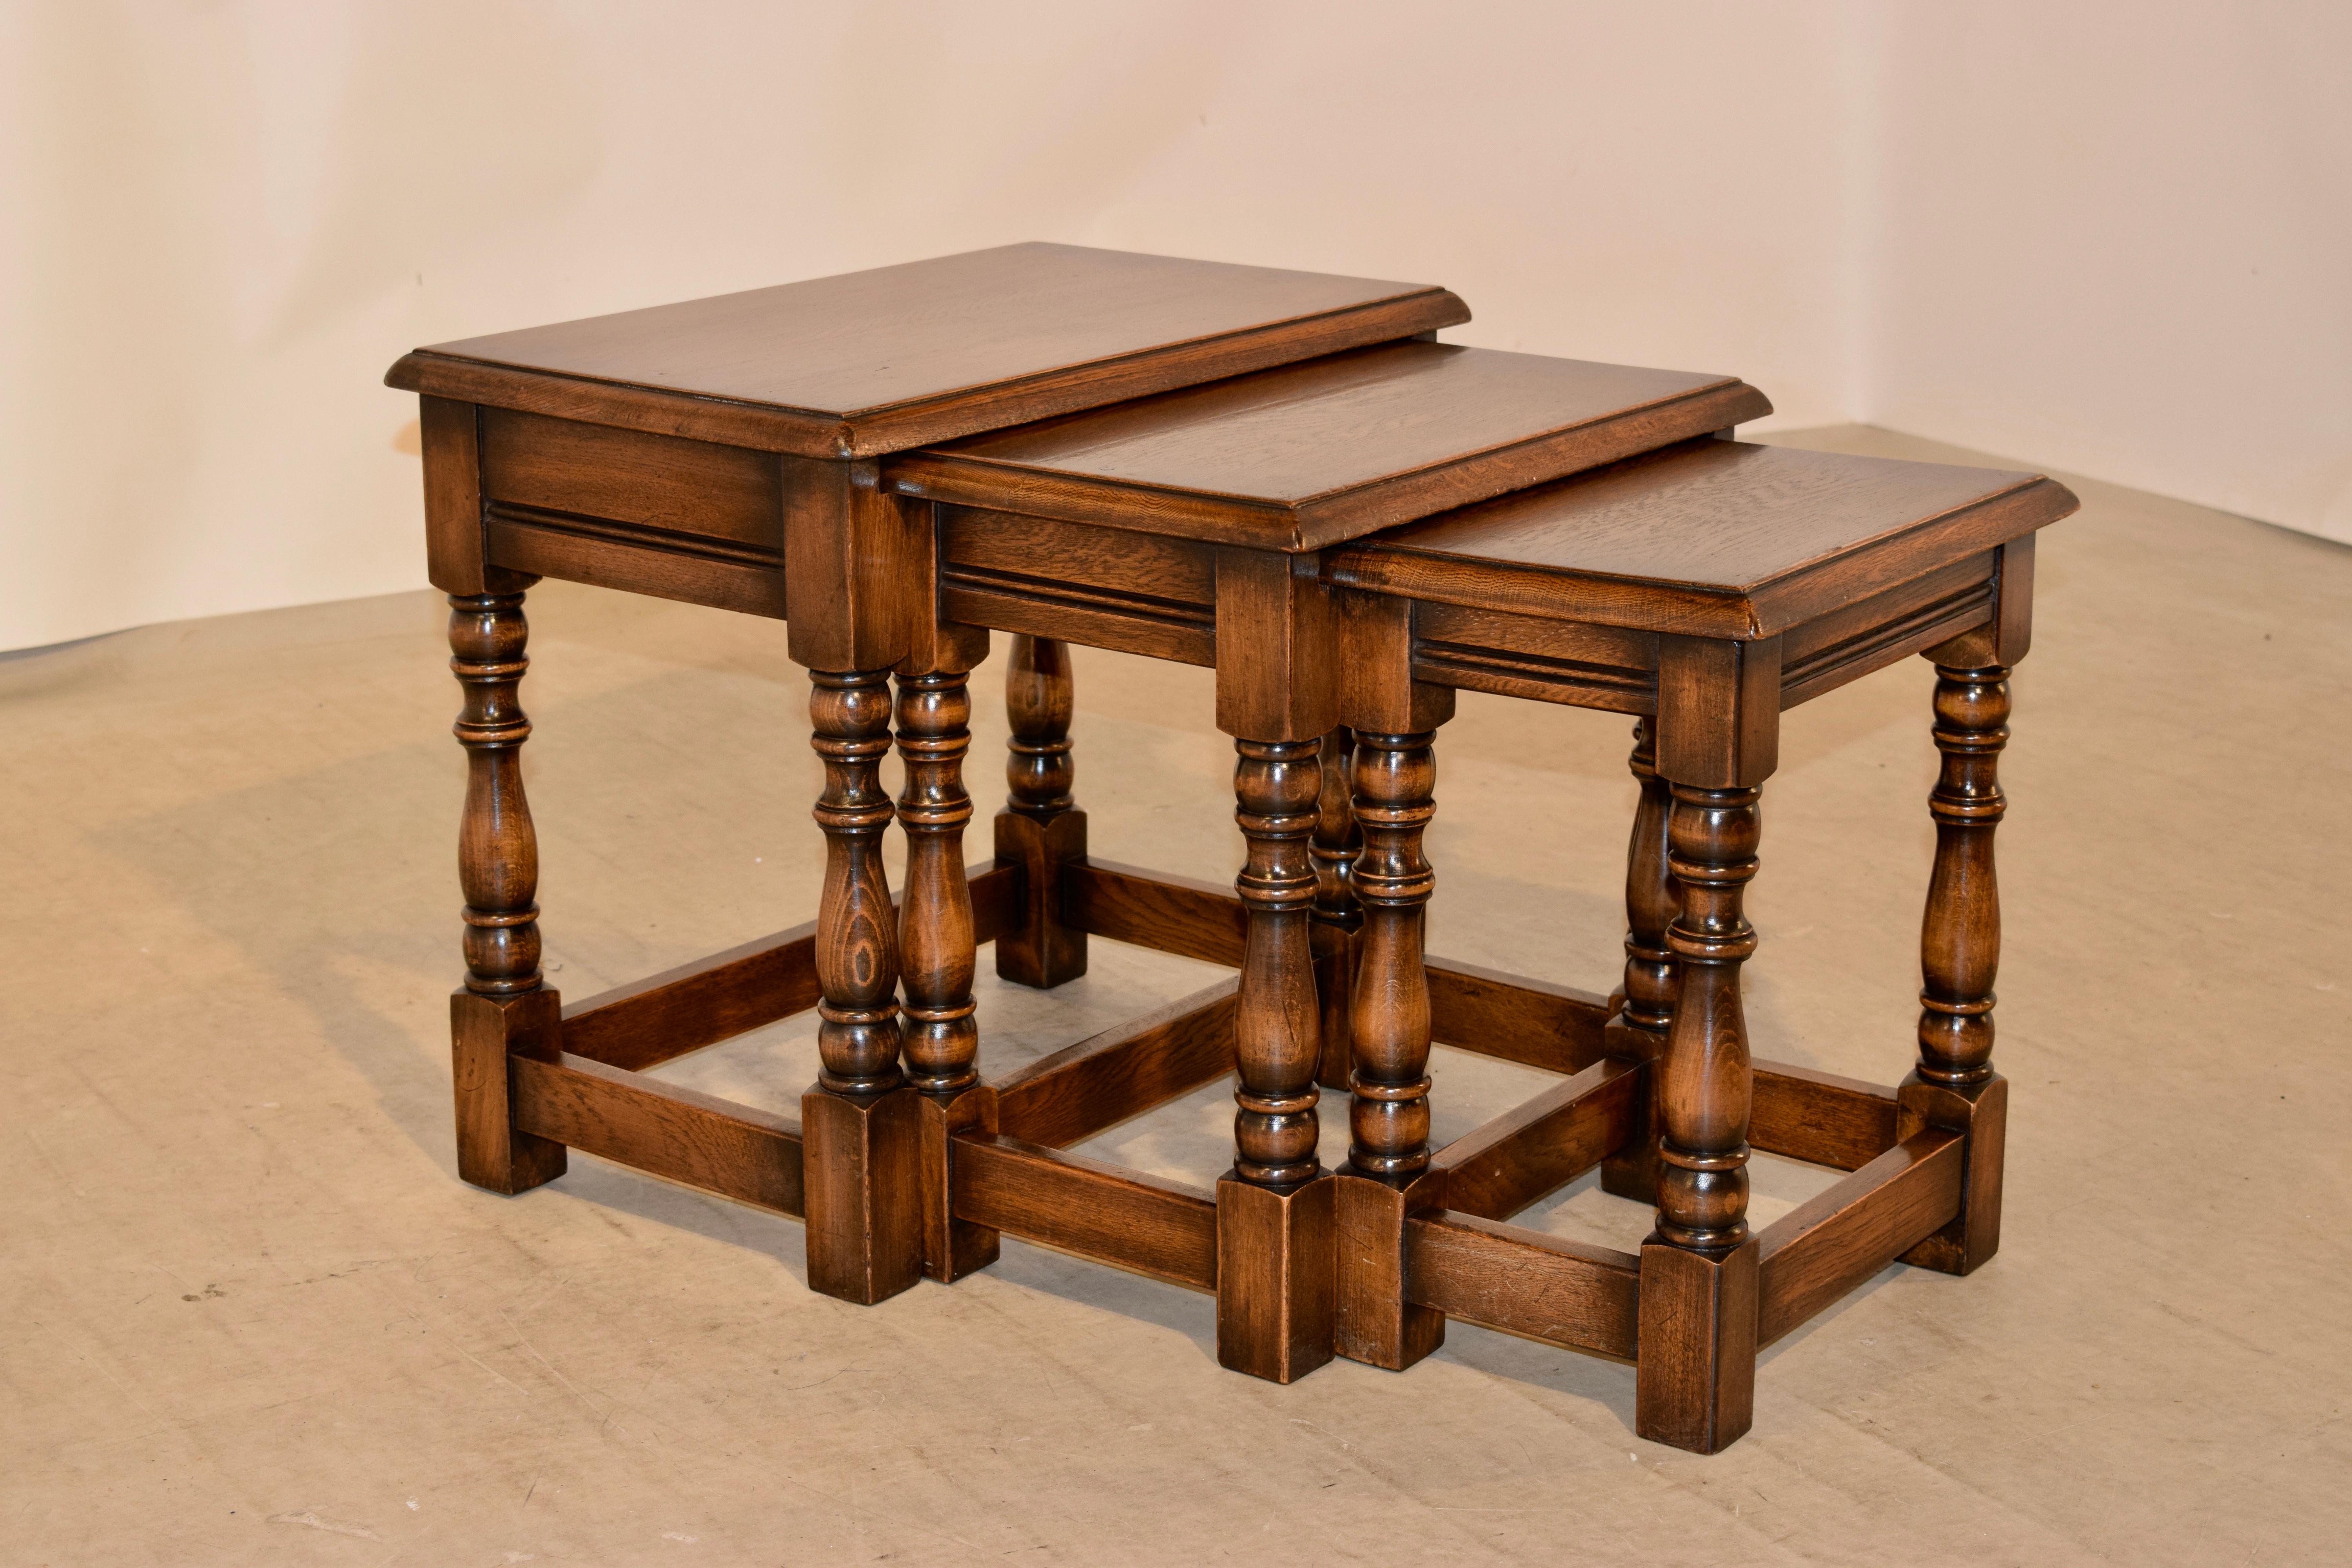 Turned Nest of Three Tables, circa 1900